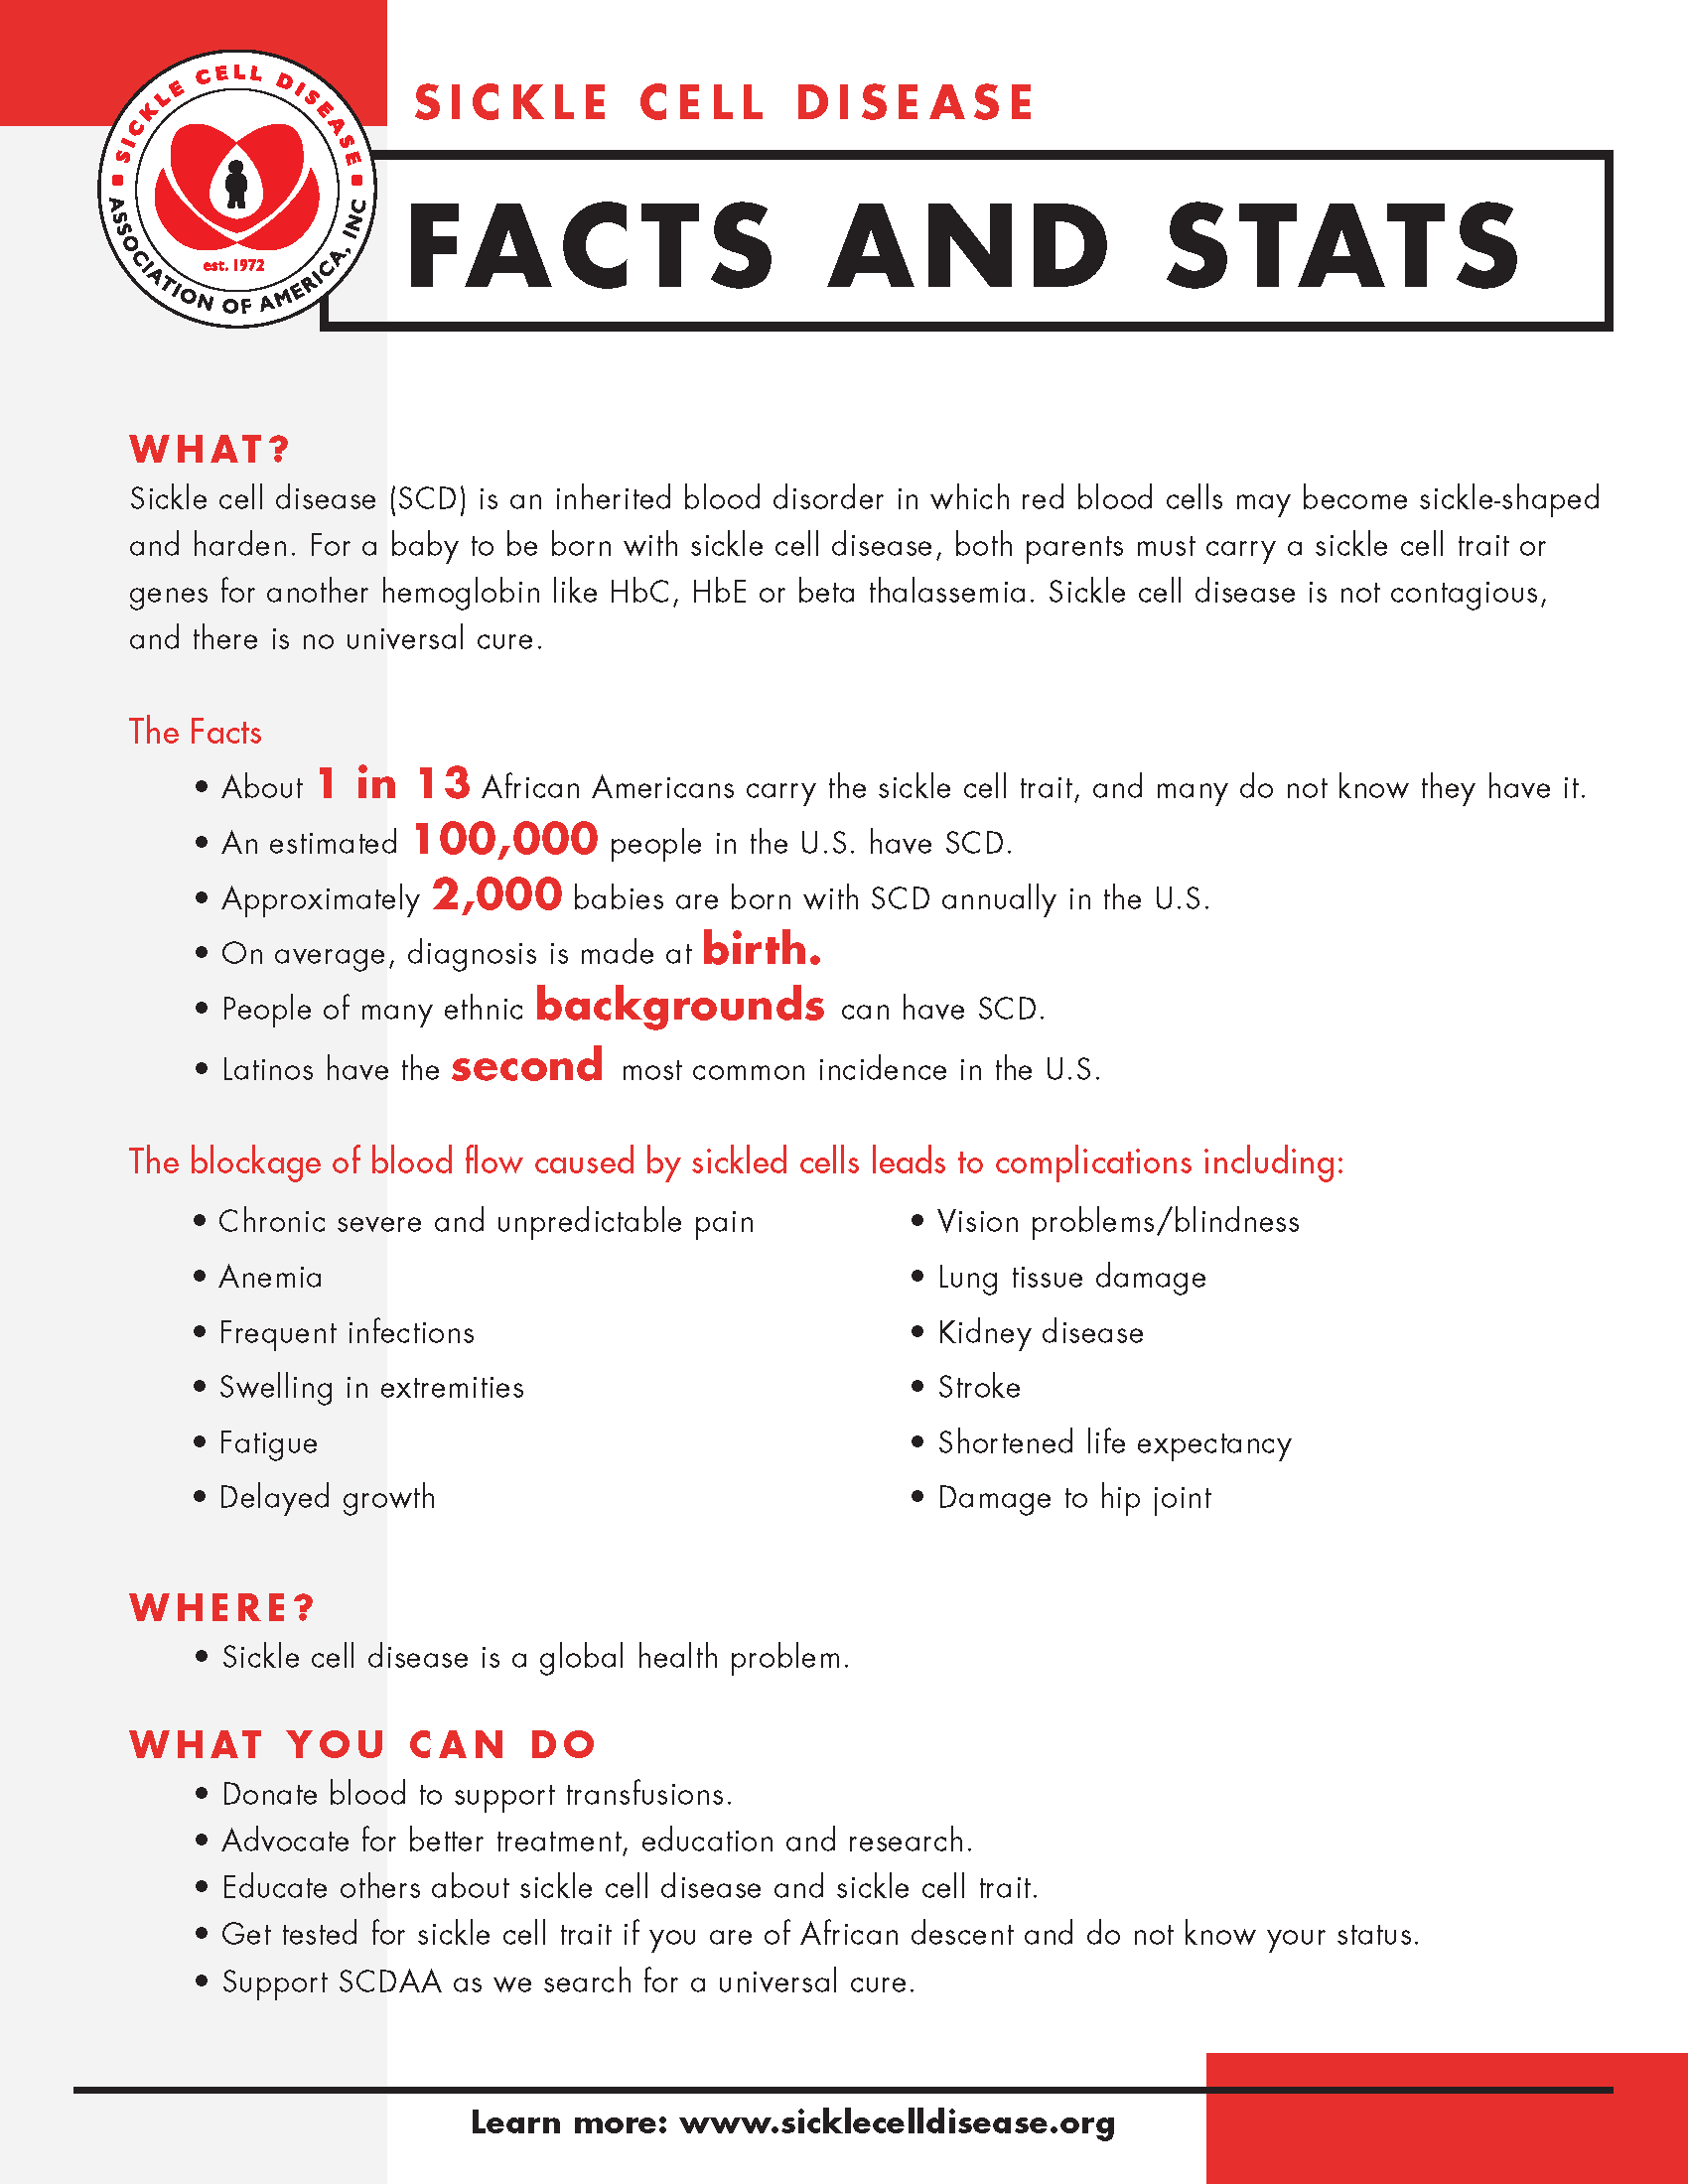 https://www.sicklecellpbc.org/uploads/images/H-2012-Sept-Fact-Sheet-2021%20(1)_Page_1.png